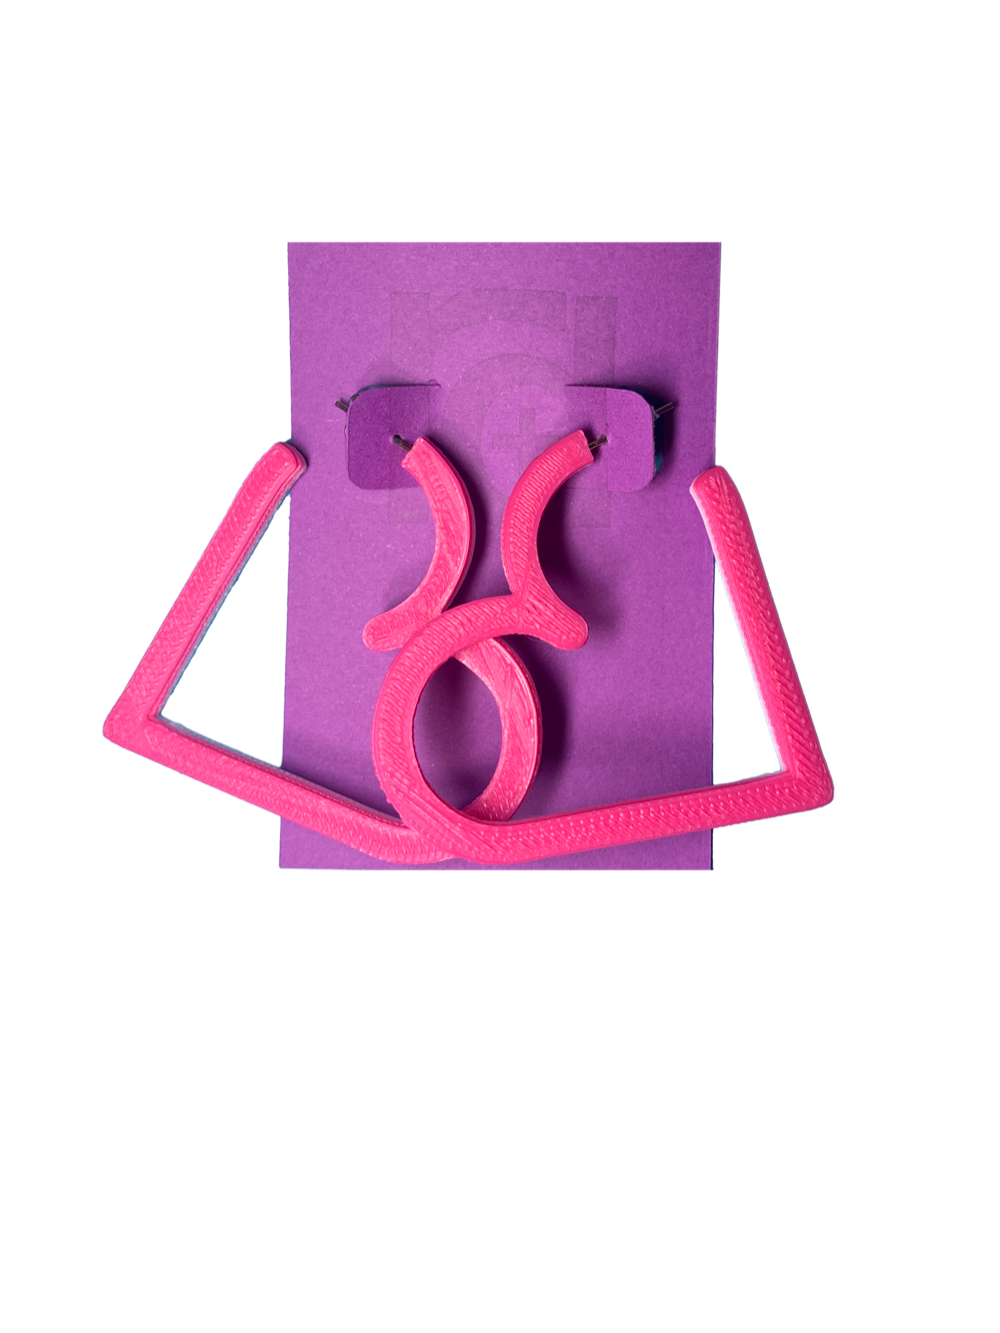 On a purple R+D card is a pair of 3D printed hoops. They are in the shape of a heart with bright hot pink visible on the top layer. Printed with a plant based filament, there are three colors layered: hot pink, light pink, and white. 